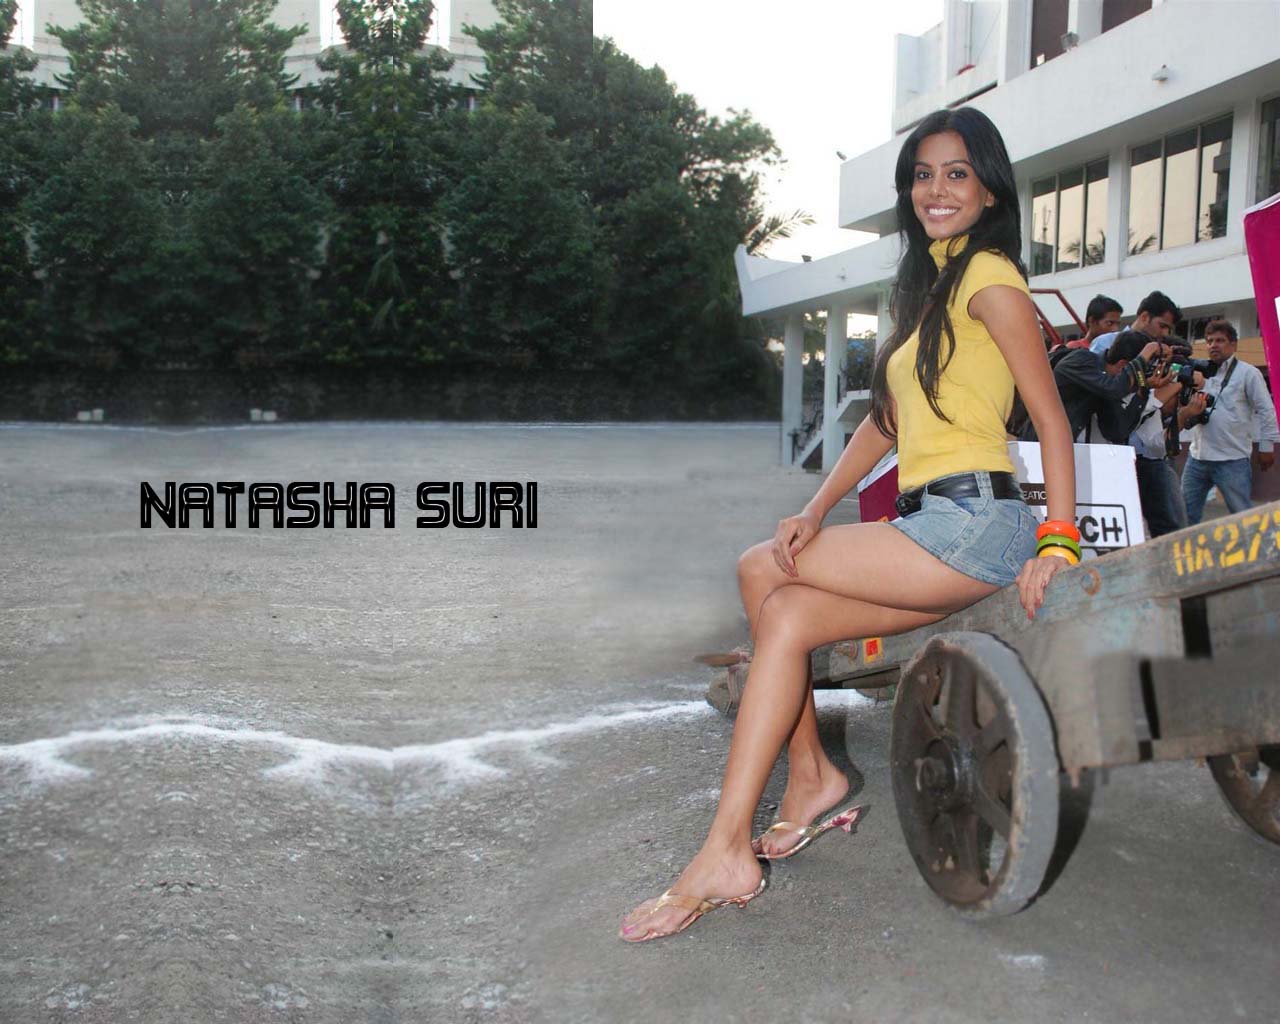 Natasha Suri Wallpapers,cheapest mobile phones, 3g mobile phones, 3 mobile phones, Mobile Shop, New Phone Shop, Nokia Mobile Phones, Samsung Mobile Phones, Buy Mobile Phone mobile phone tariffs, 3g phones, girls, business mobile phones,Cheap Mobile Phones, gadgets, Mobile Wallpapers mesothelioma, mesothelioma patient, Gadgets , student loan, student loan consolidation, insurance,health insurance,car insurance,beauty schools,lawyers,Beauty Tips, girls, Health Tips, Tutorial, Car, Computer Tips, Software, car accident lawyer